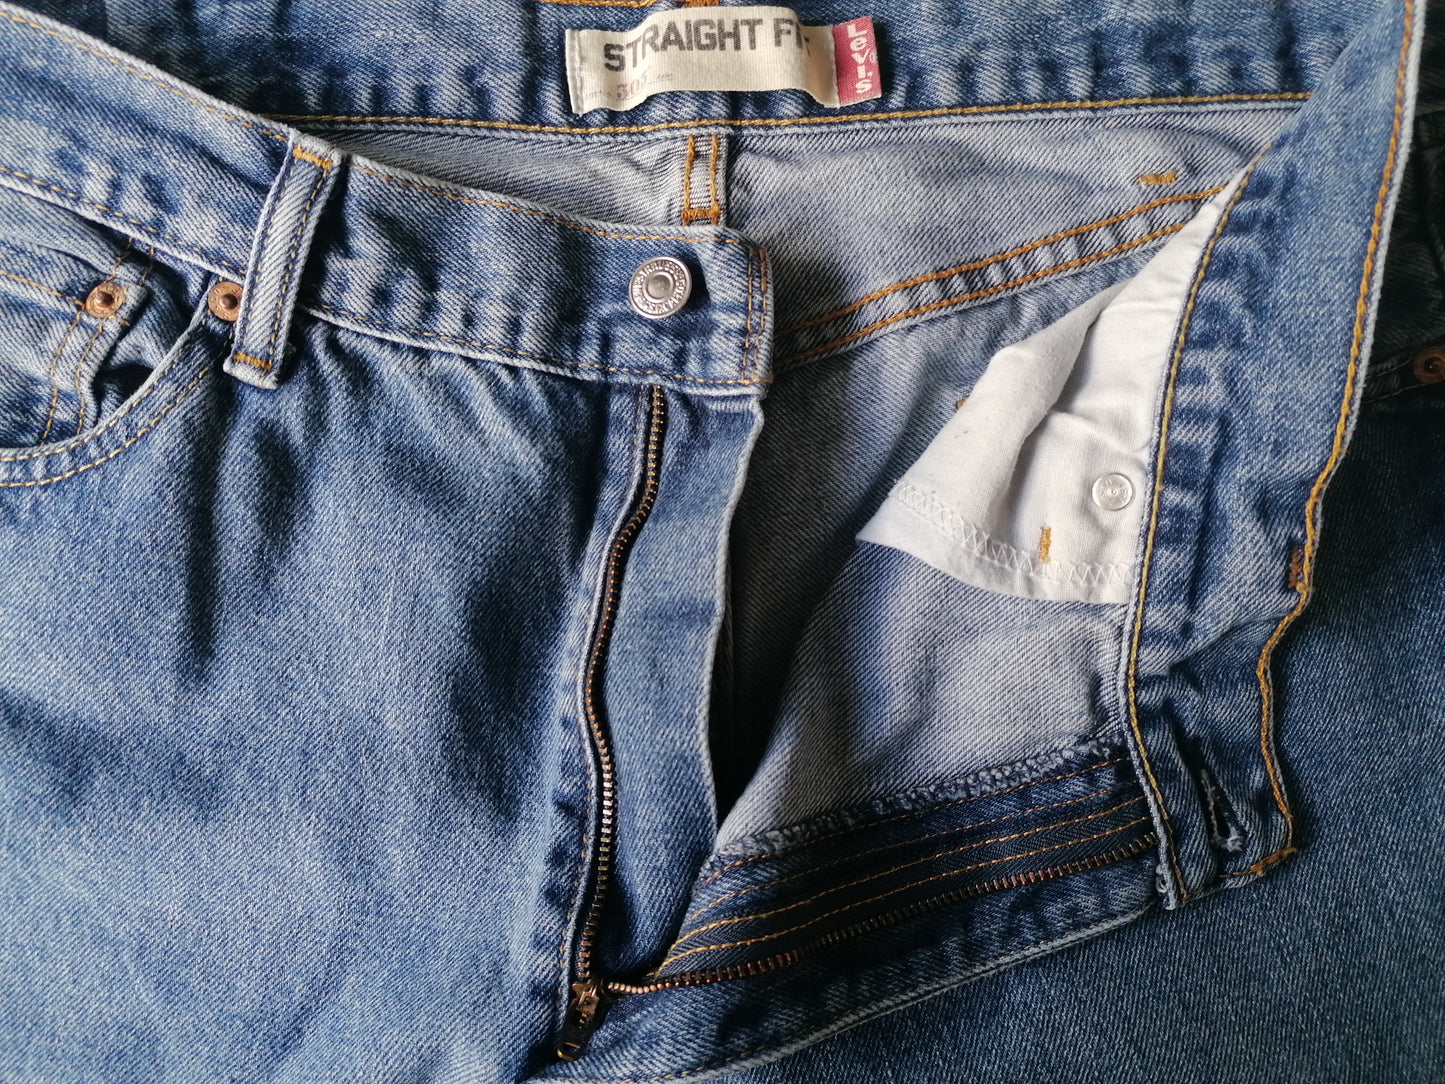 Levi's 505 jeans. Blue colored. Size W38 - L30. Straight fit.